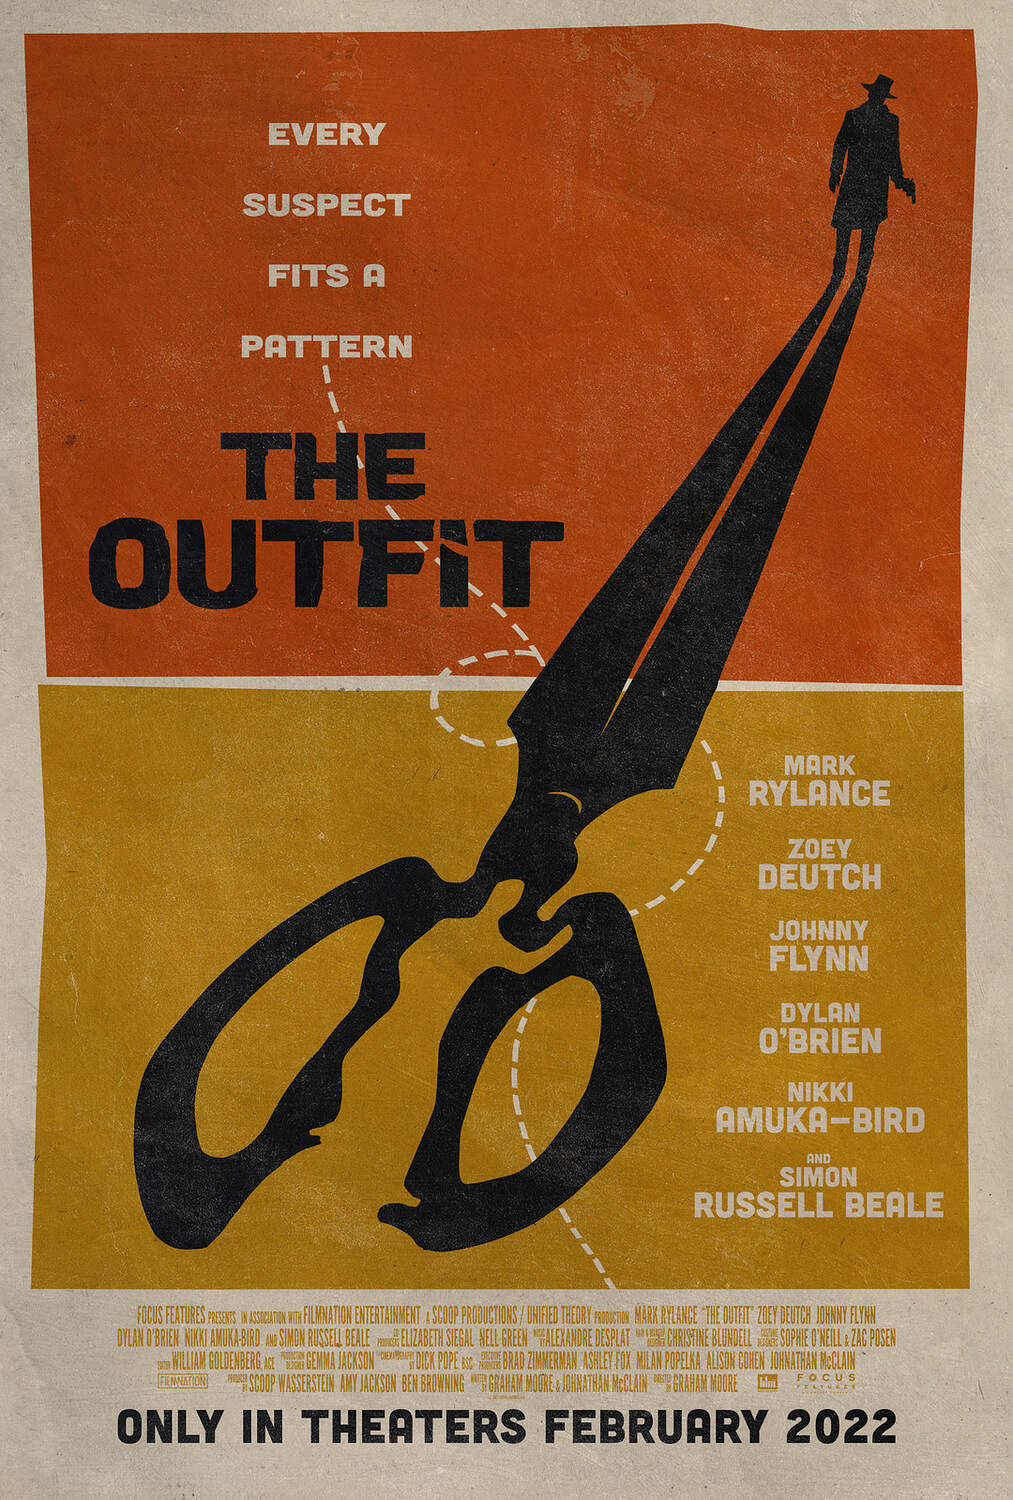 1st Trailer For 'The Outfit' Movie